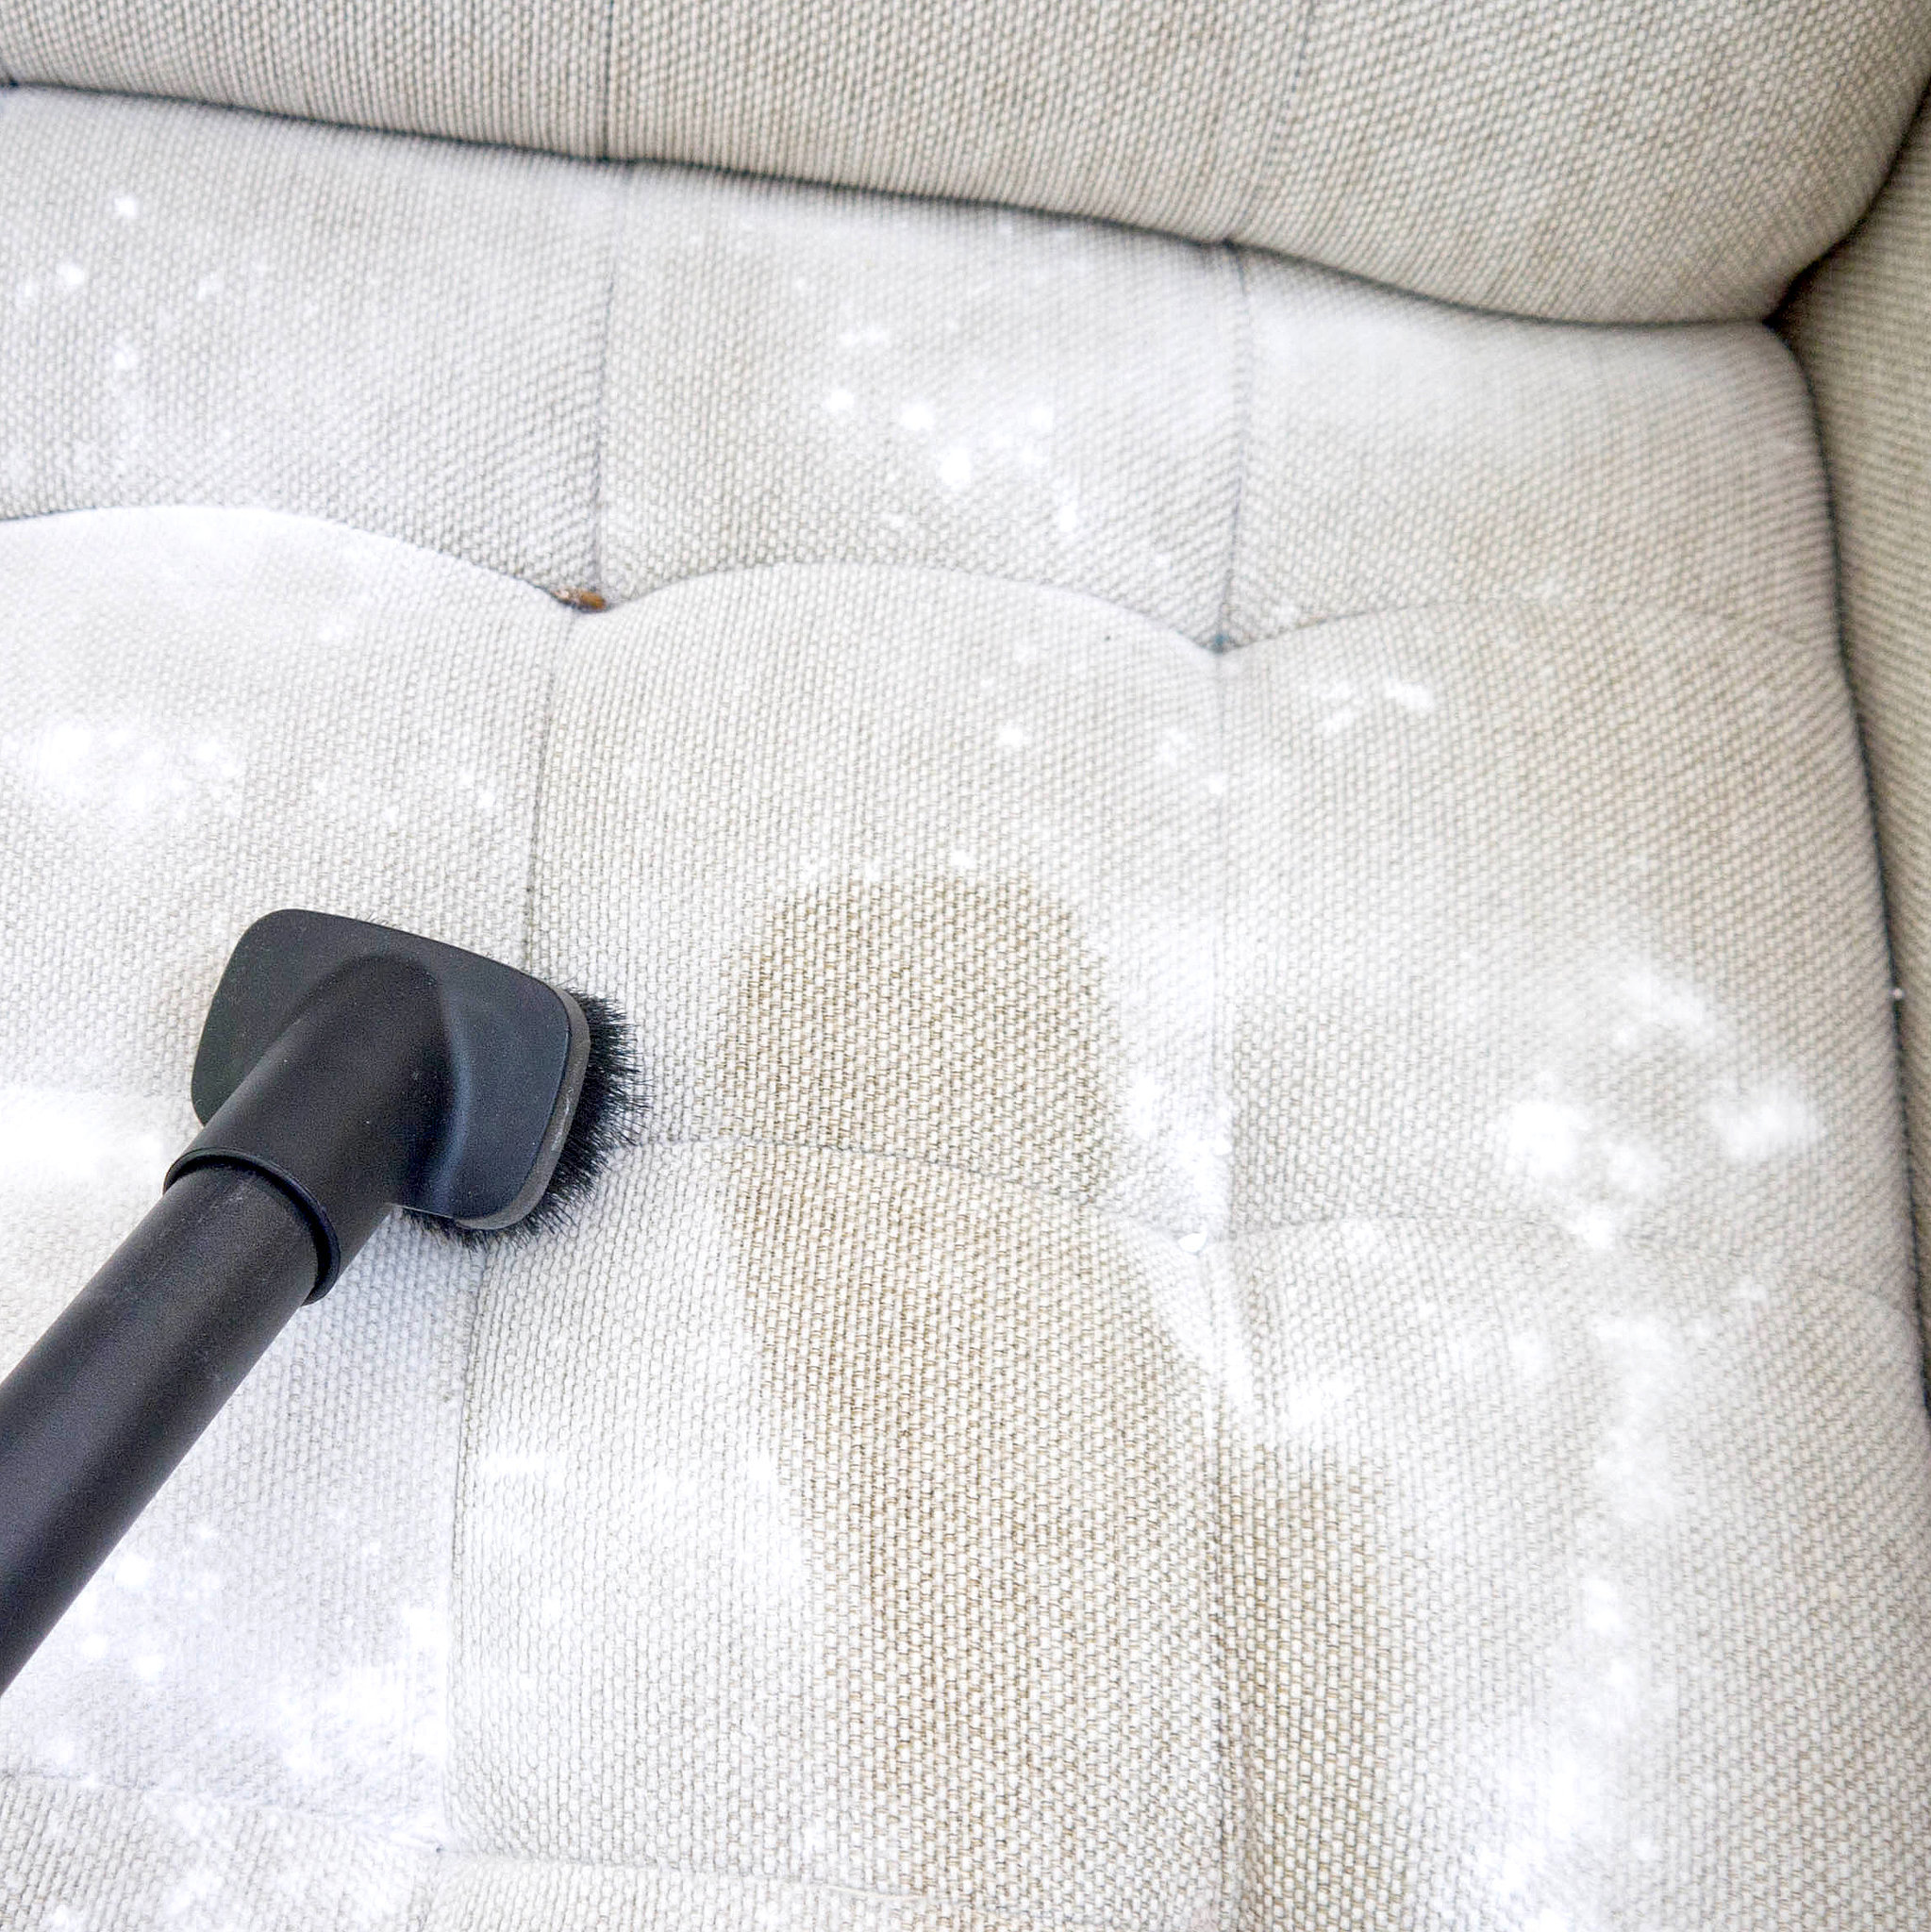 How To Clean A Natural Fabric Couch, Can I Use Baking Soda To Clean My Sofa